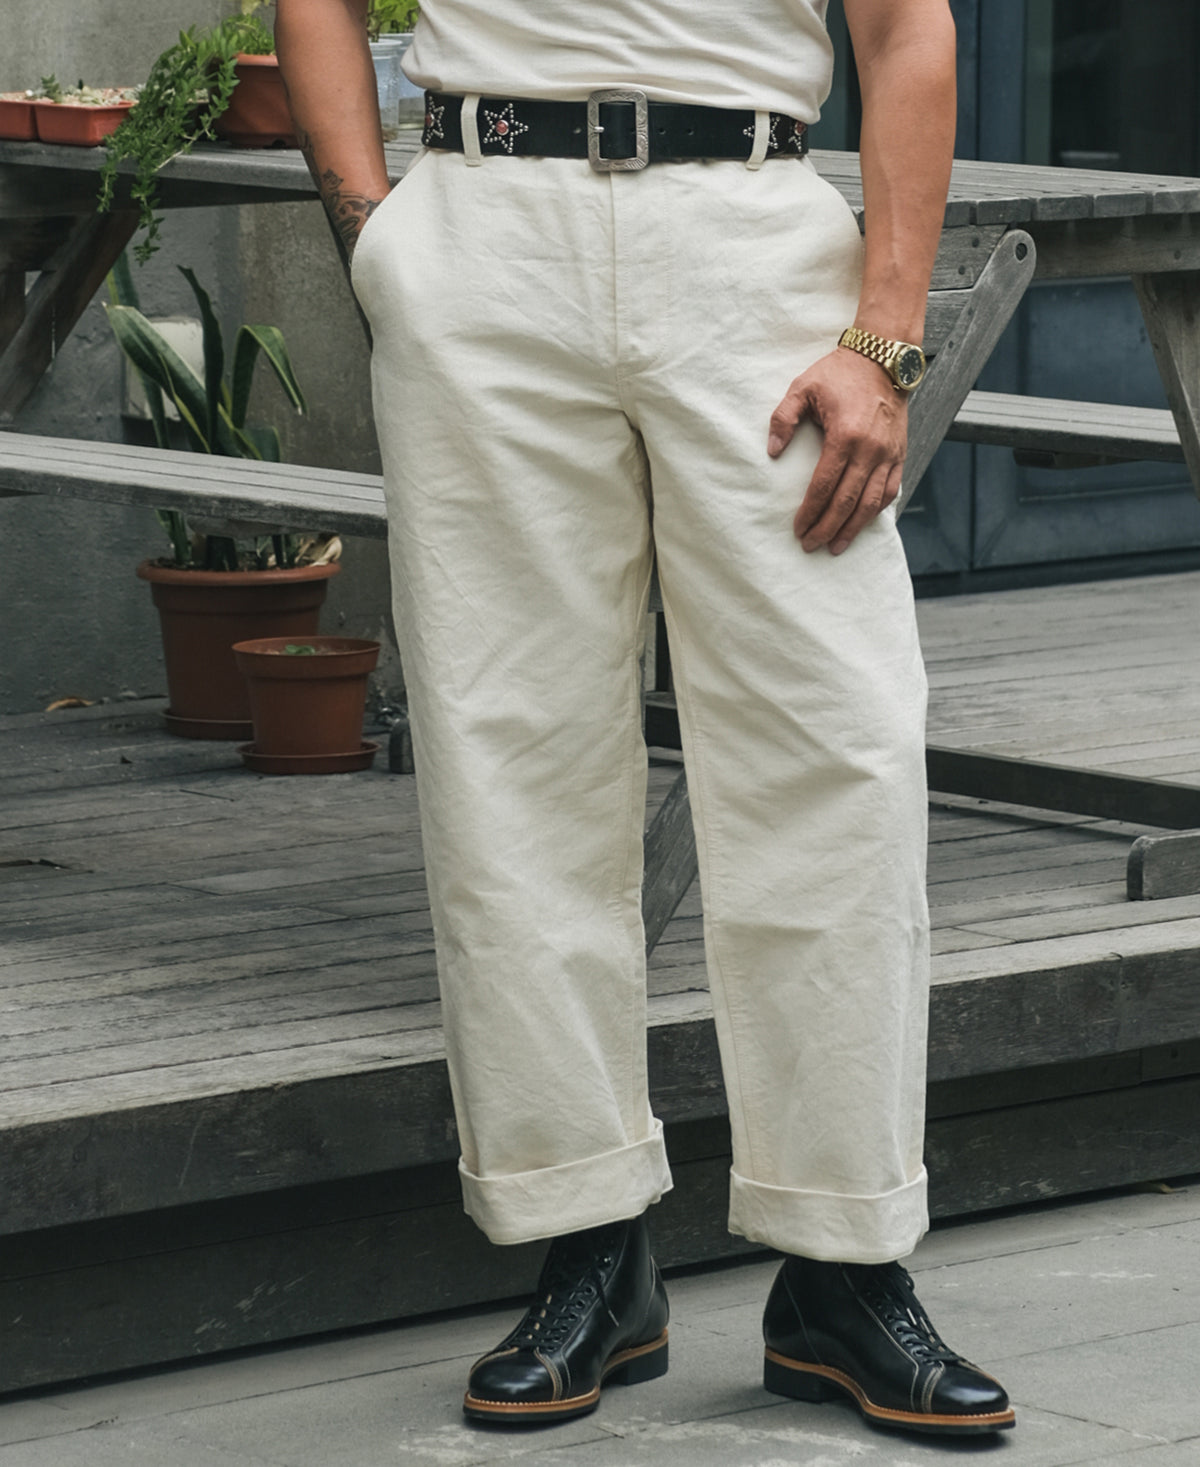 Experimental Test Sample Protective Cover Pants - White